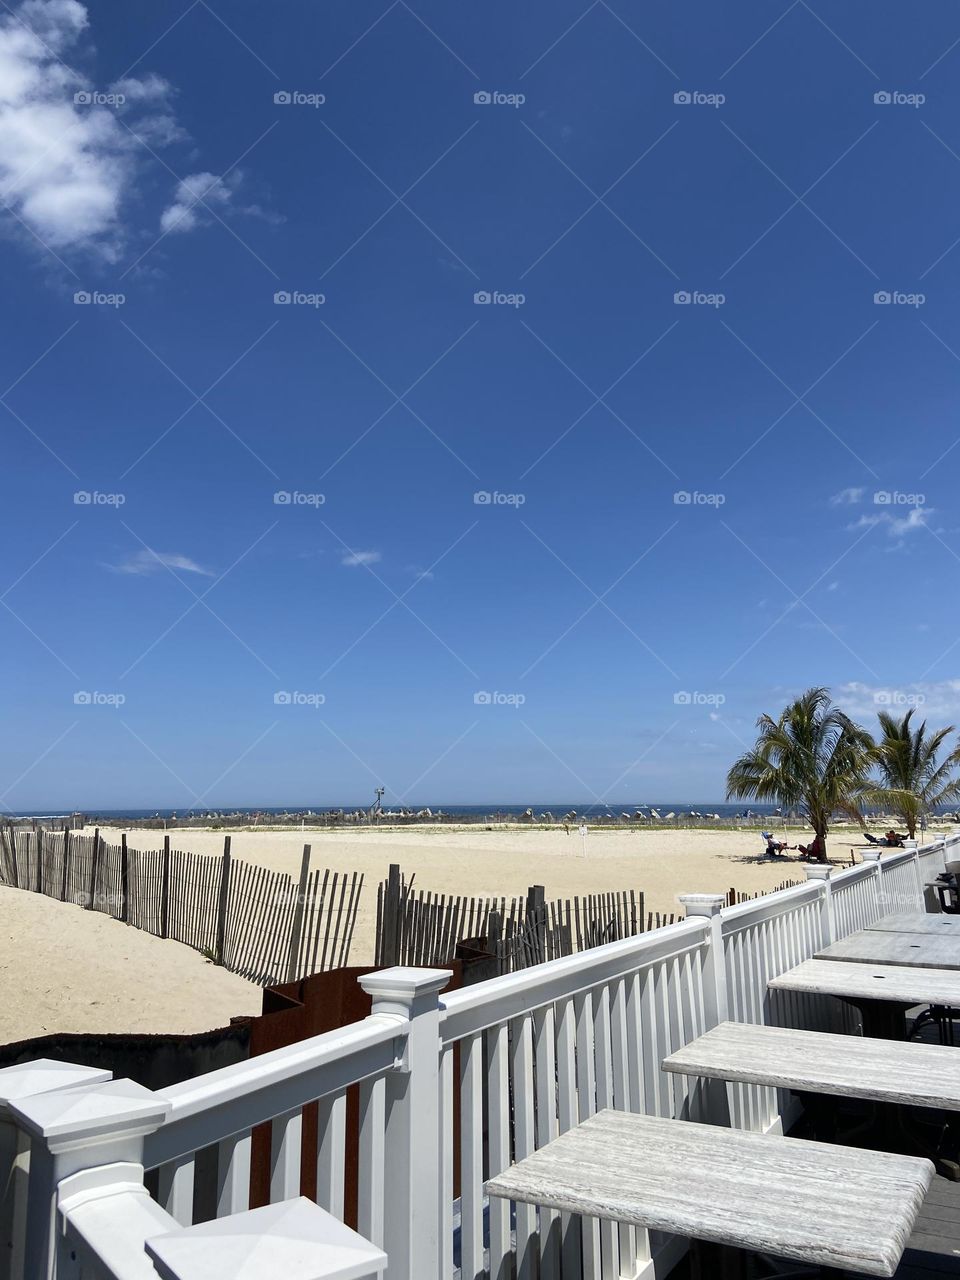 A corner of Point Pleasant Beach boardwalk with an amazing view of the beach and ocean. Please put me in the corner! Taken where the boardwalk fence meets the fence of a boardwalk eatery. The sky is blue as can be to match the ocean. 